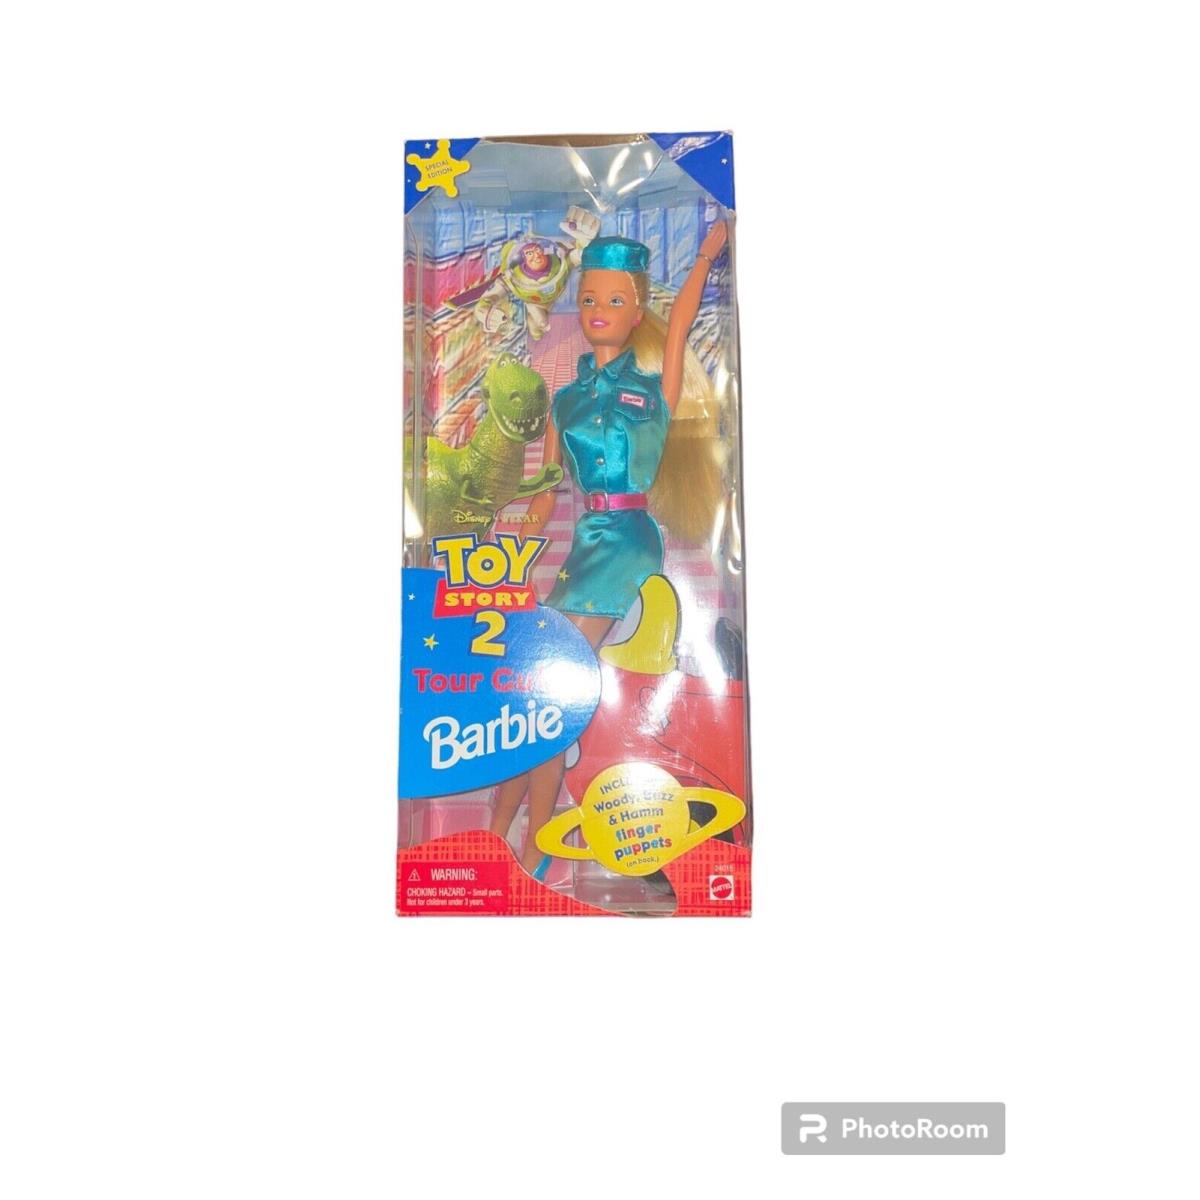 Mattel Toy Story 2 Barbie - Includes Woody Buzz Hamm Finger Puppets